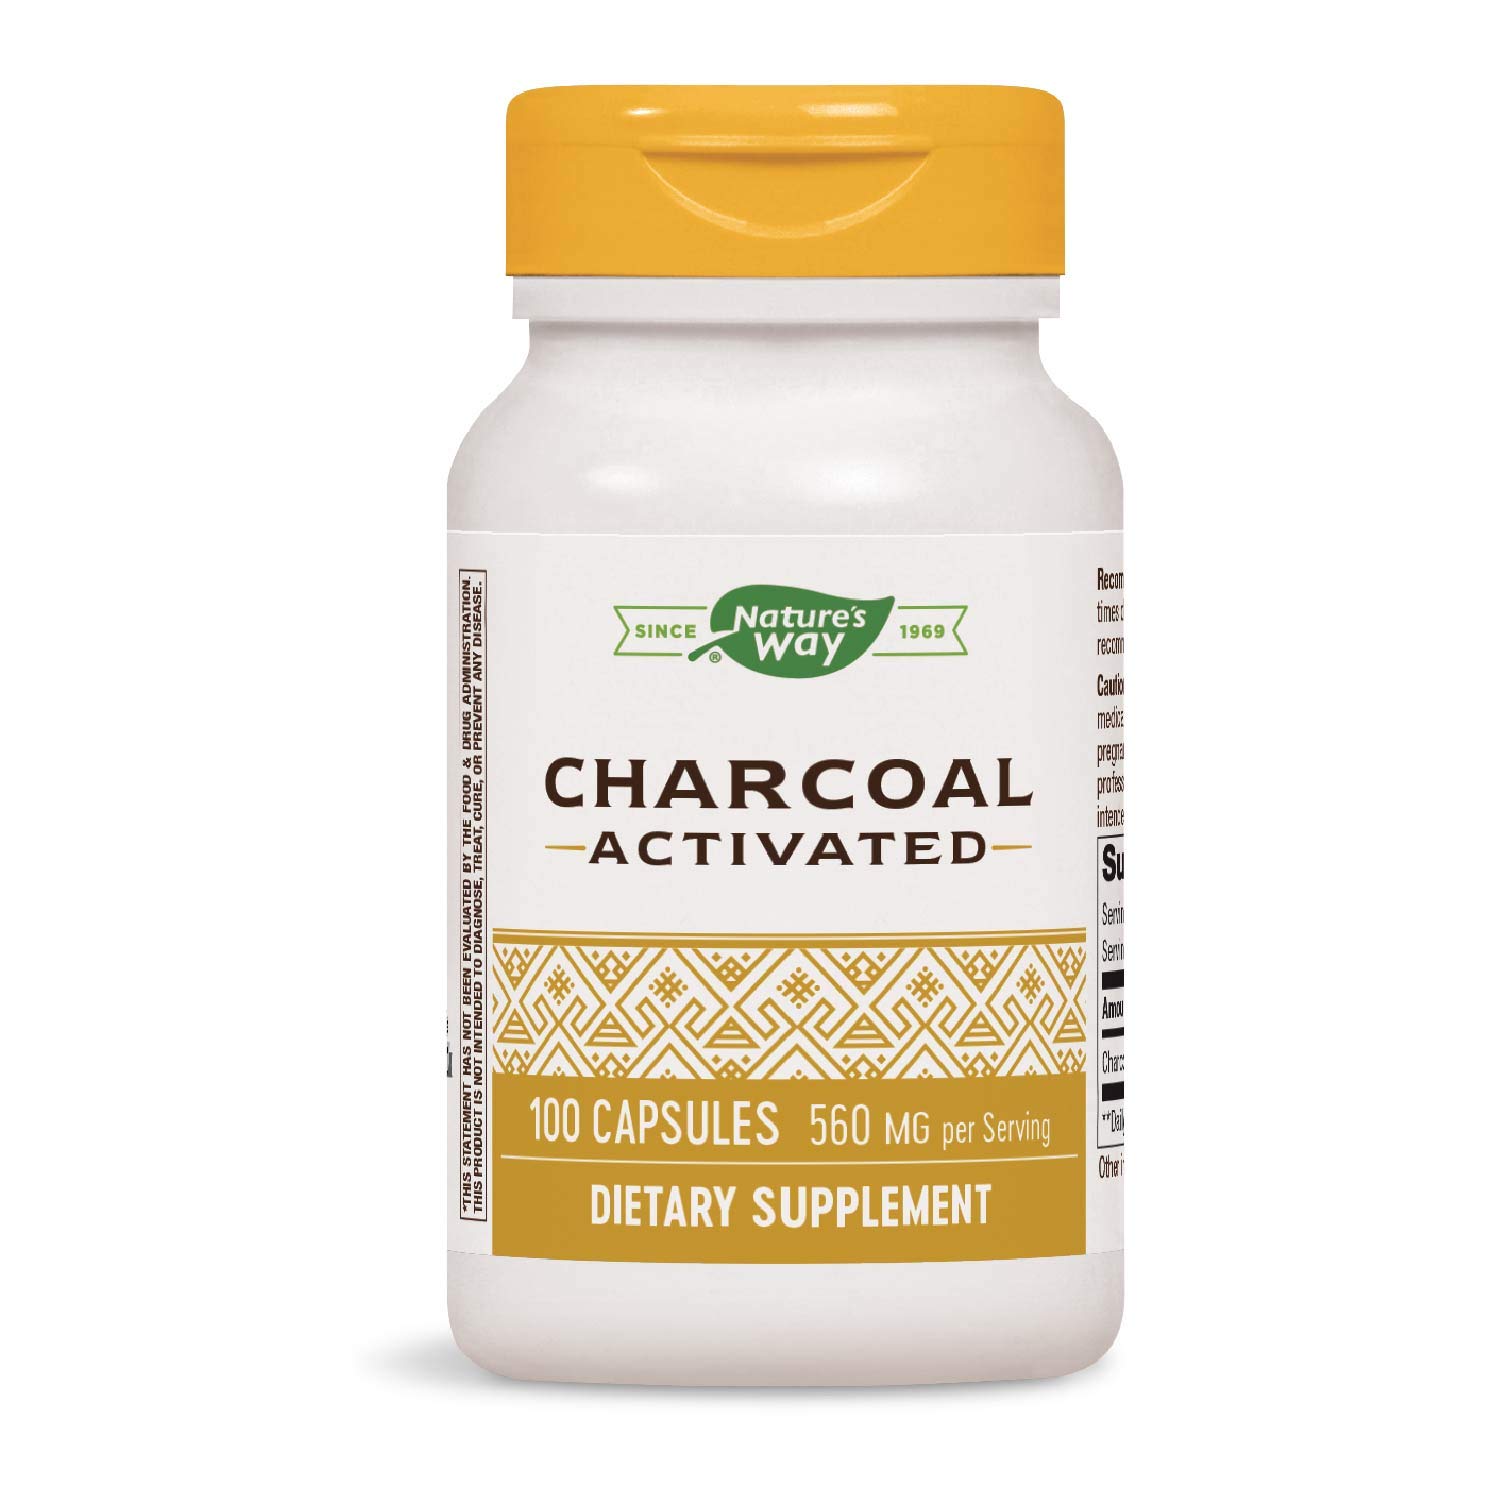 Nature's Way Activated Charcoal Supplement Gluten-Free 100 Capsules